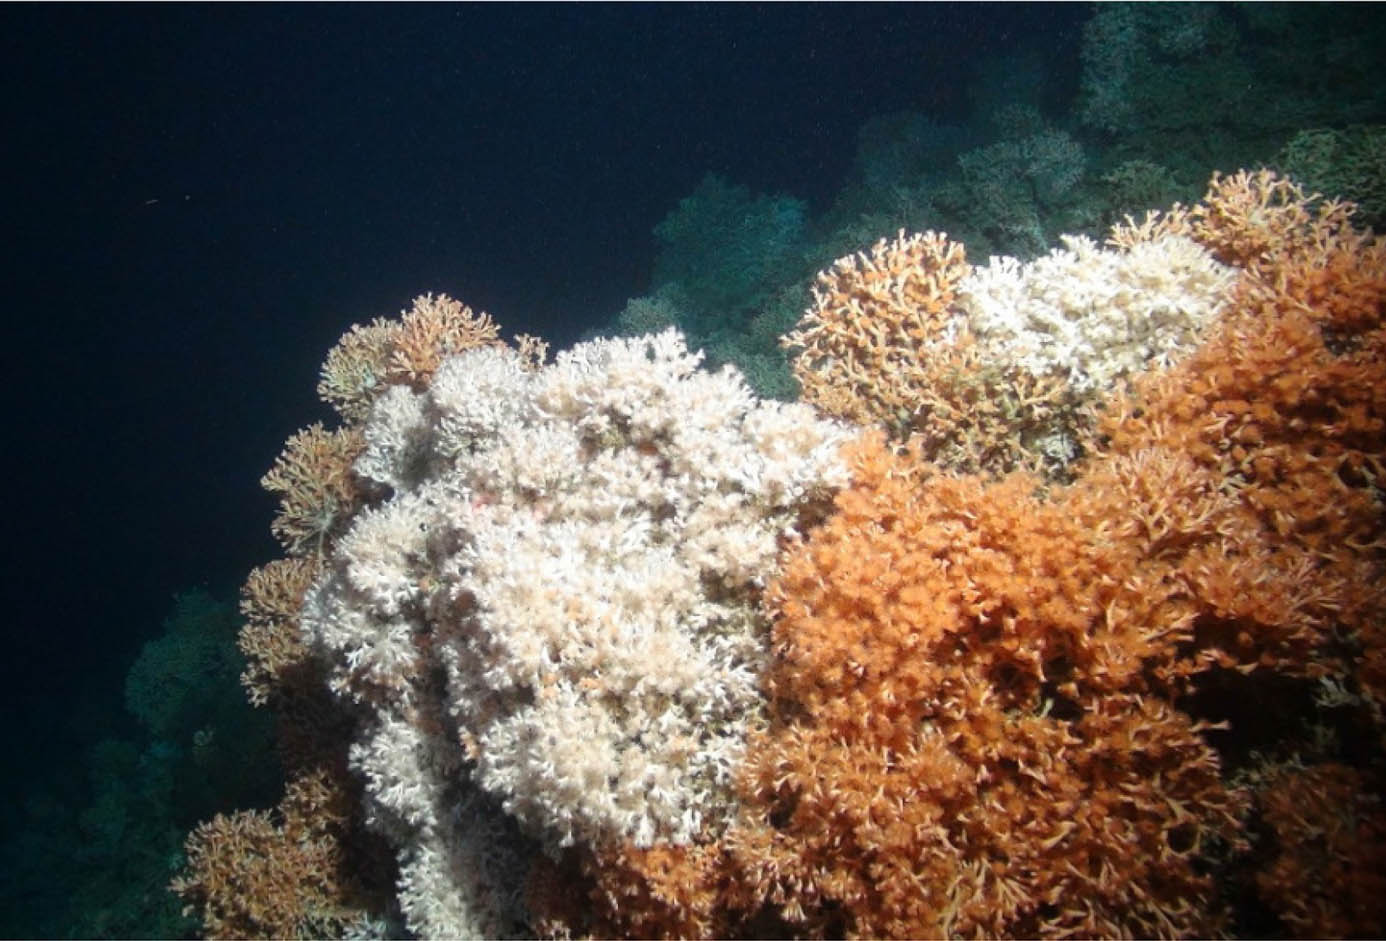 a deepwater coral in the Canyons MPA